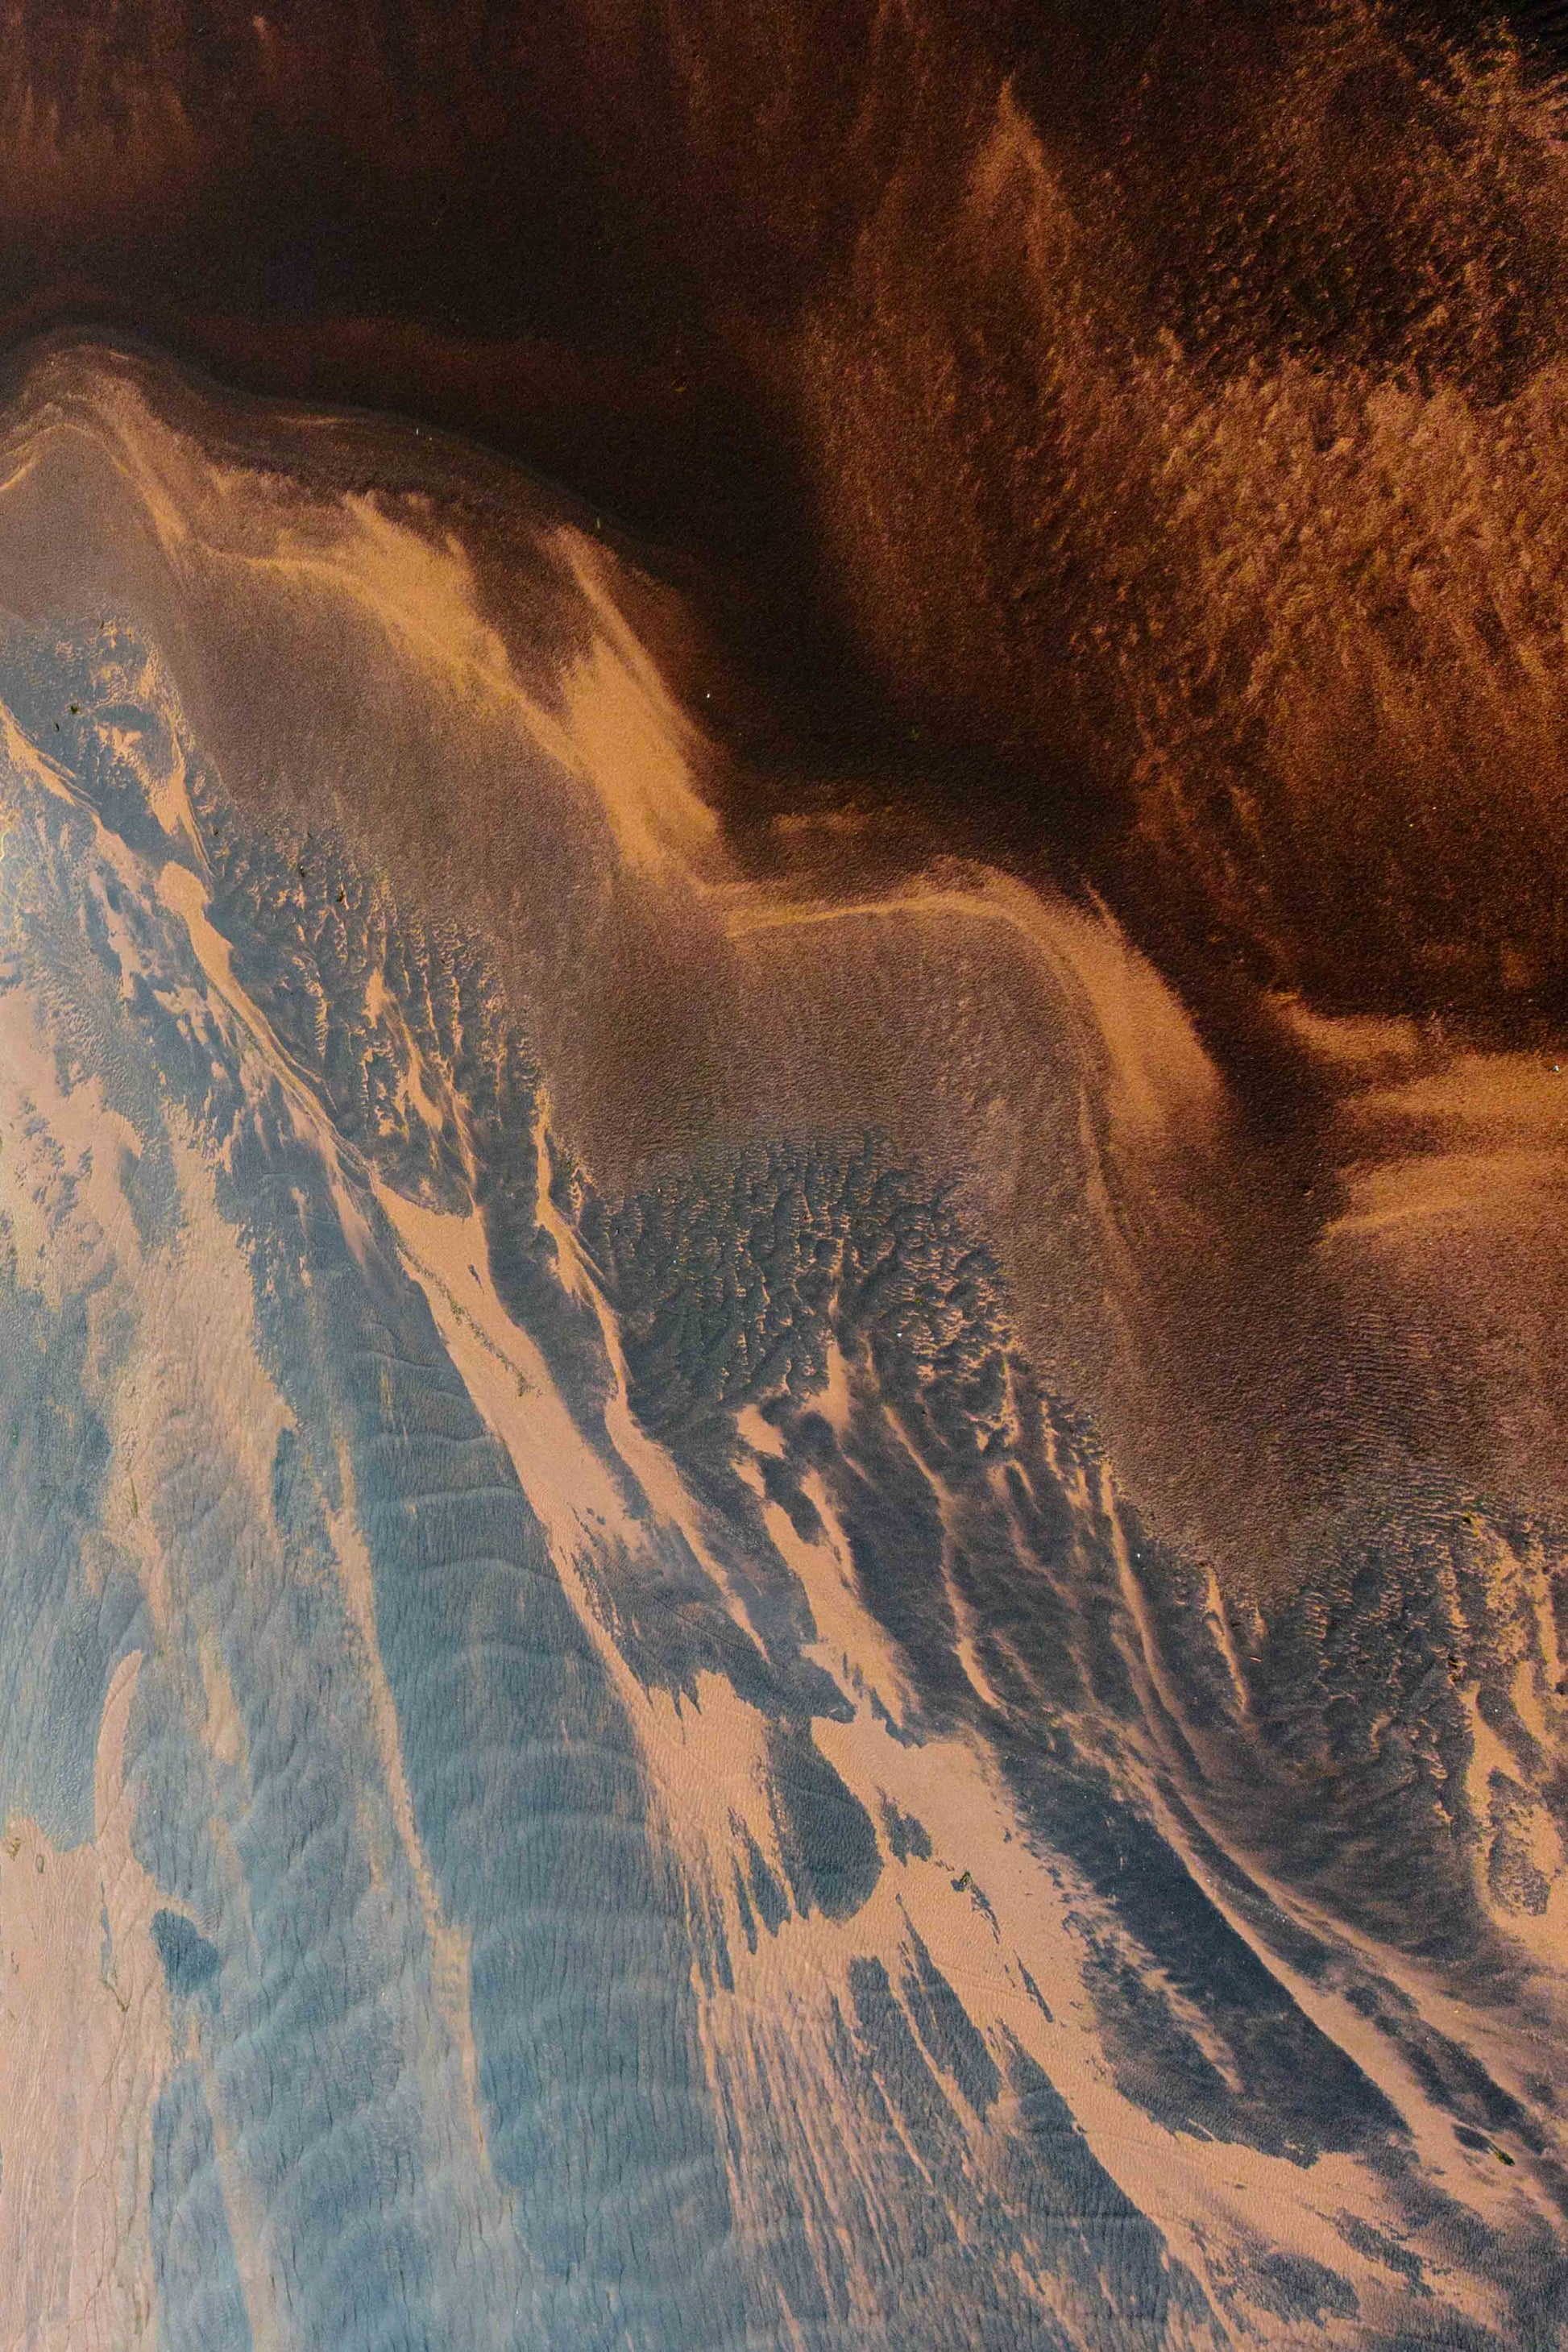 Patterns with colours draped by light and water and sand